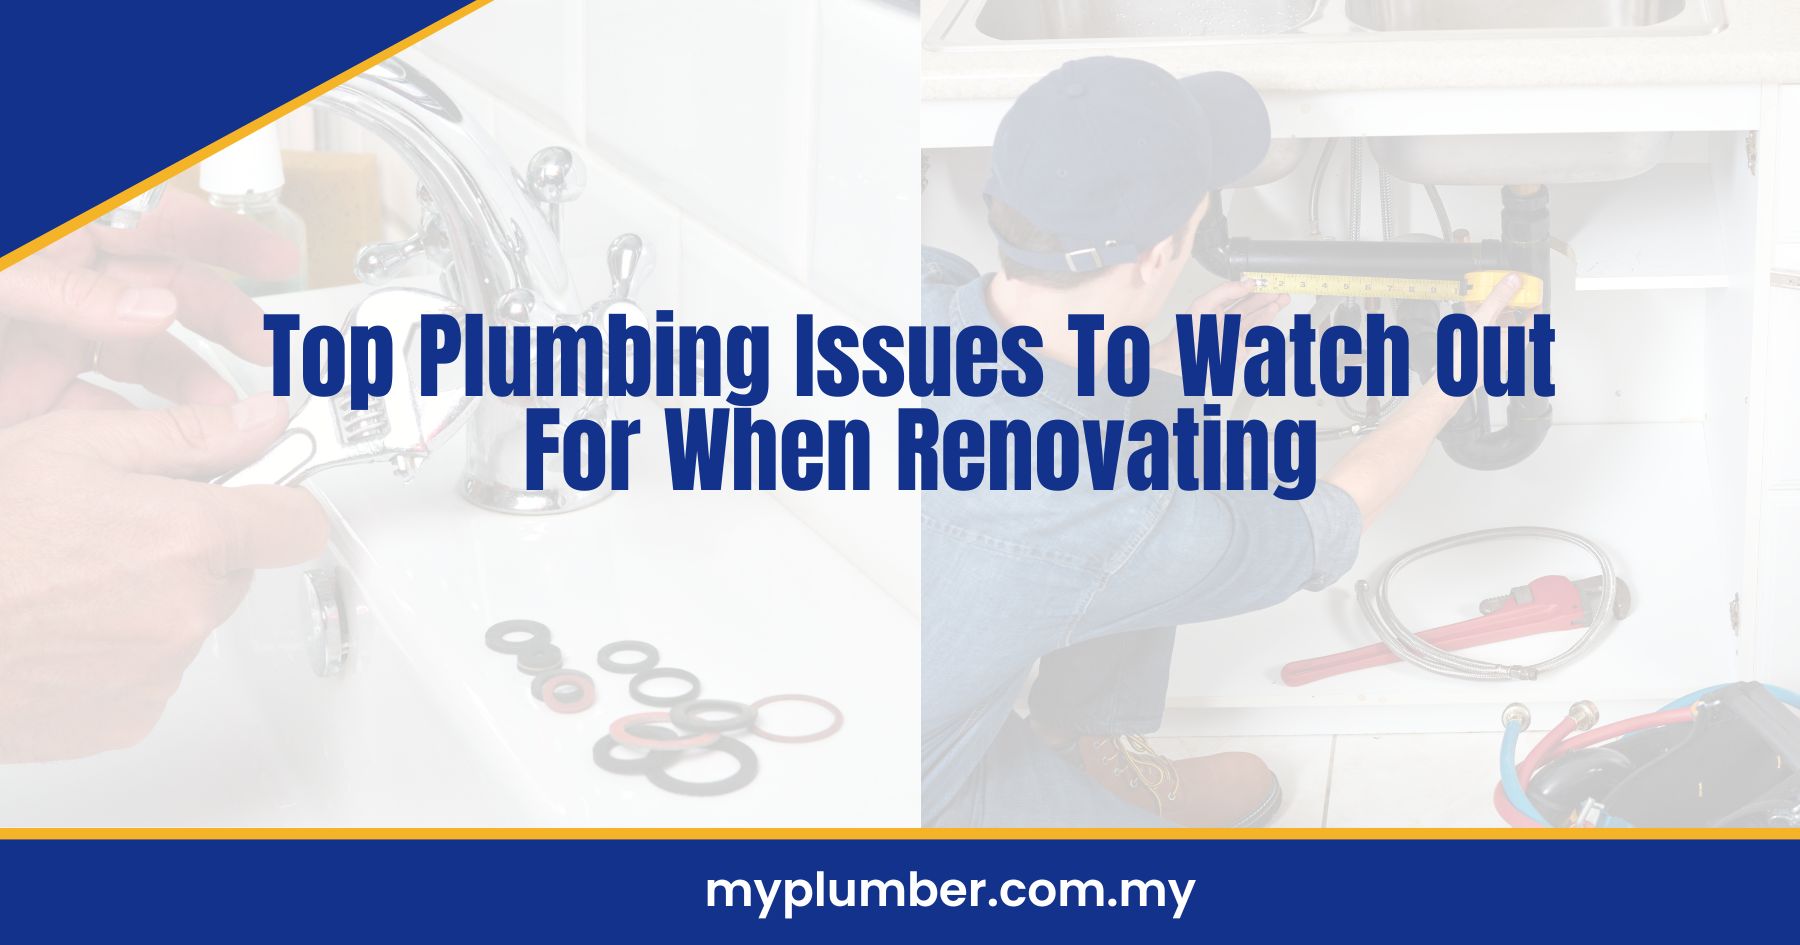 Top Plumbing Issues To Watch Out For When Renovating